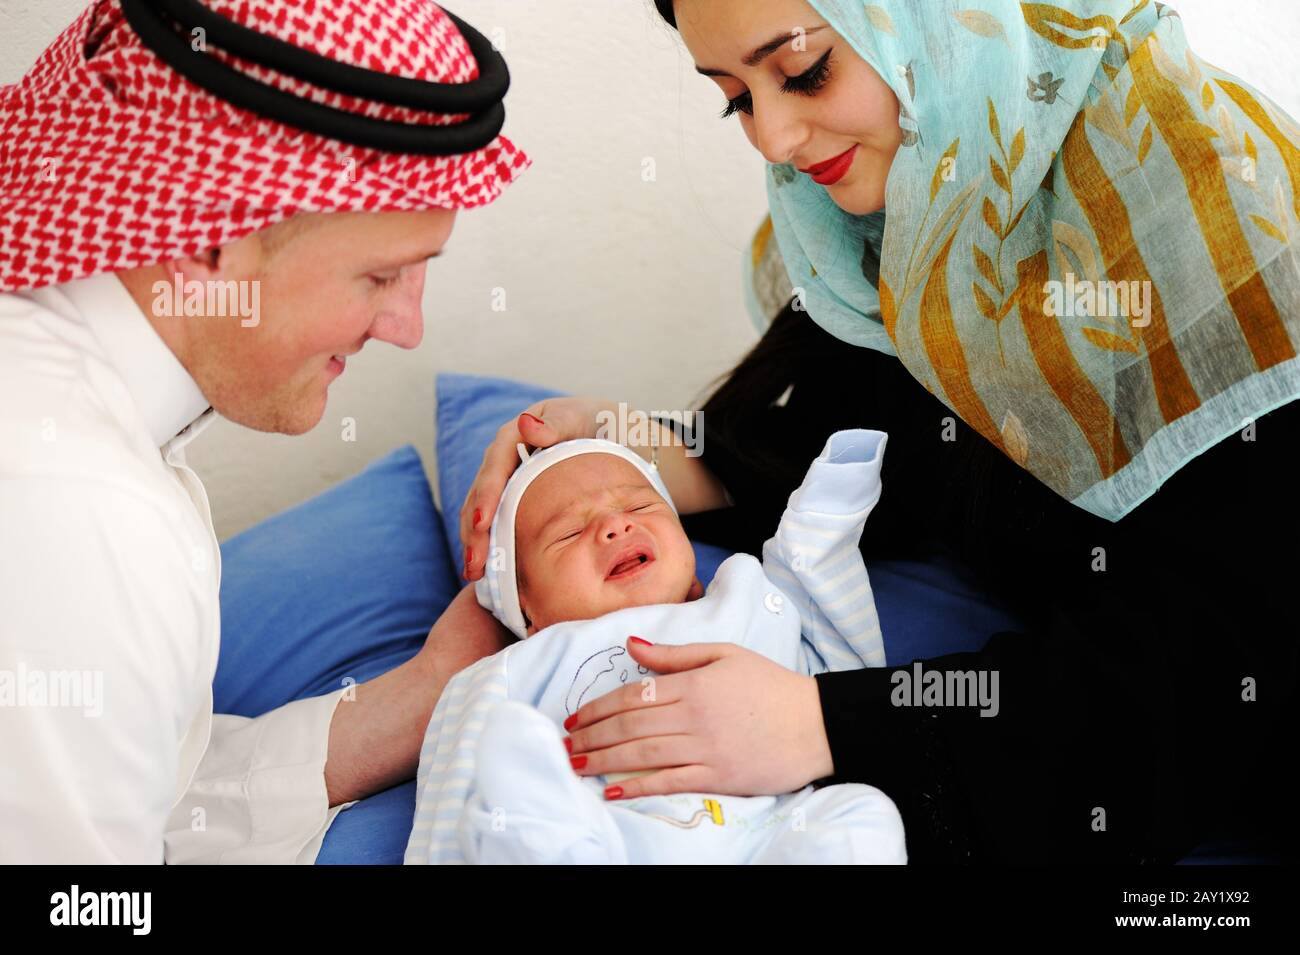 Arabic Muslim couple with new baby at home Stock Photo